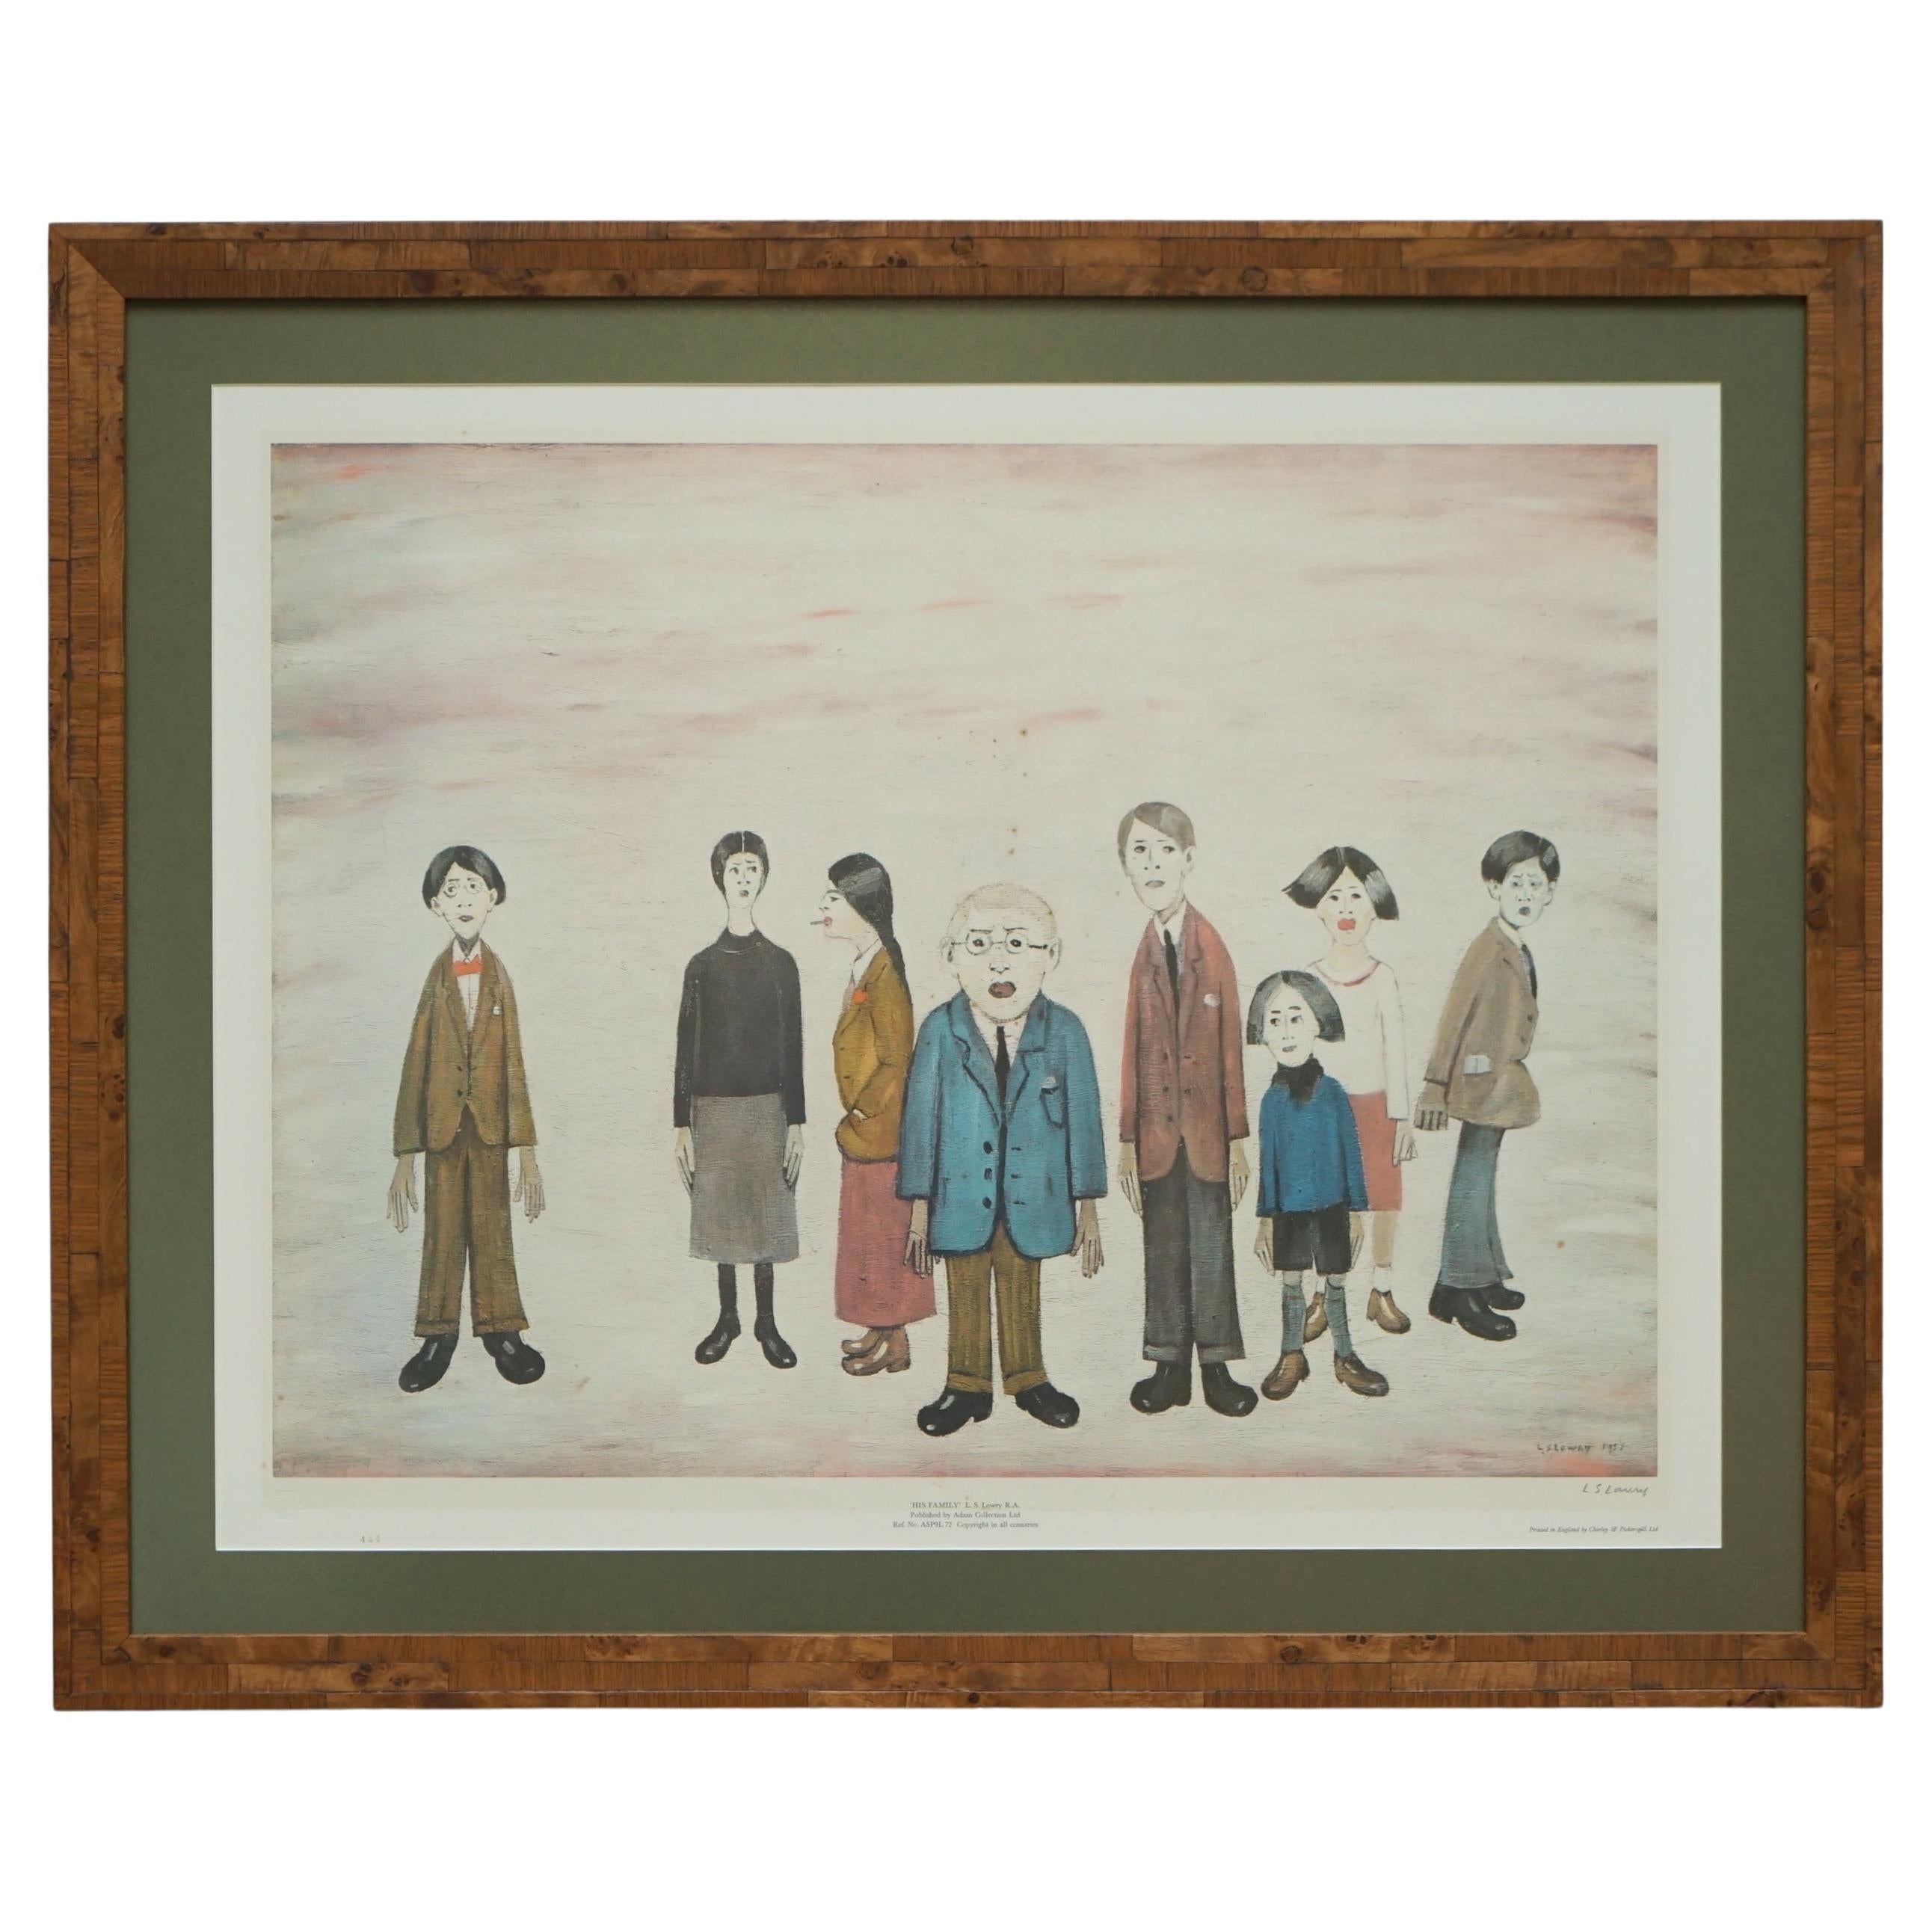 Großer Original L S Lowry His Family, signiert, Ltd Edition 444/575, Lithographiedruck